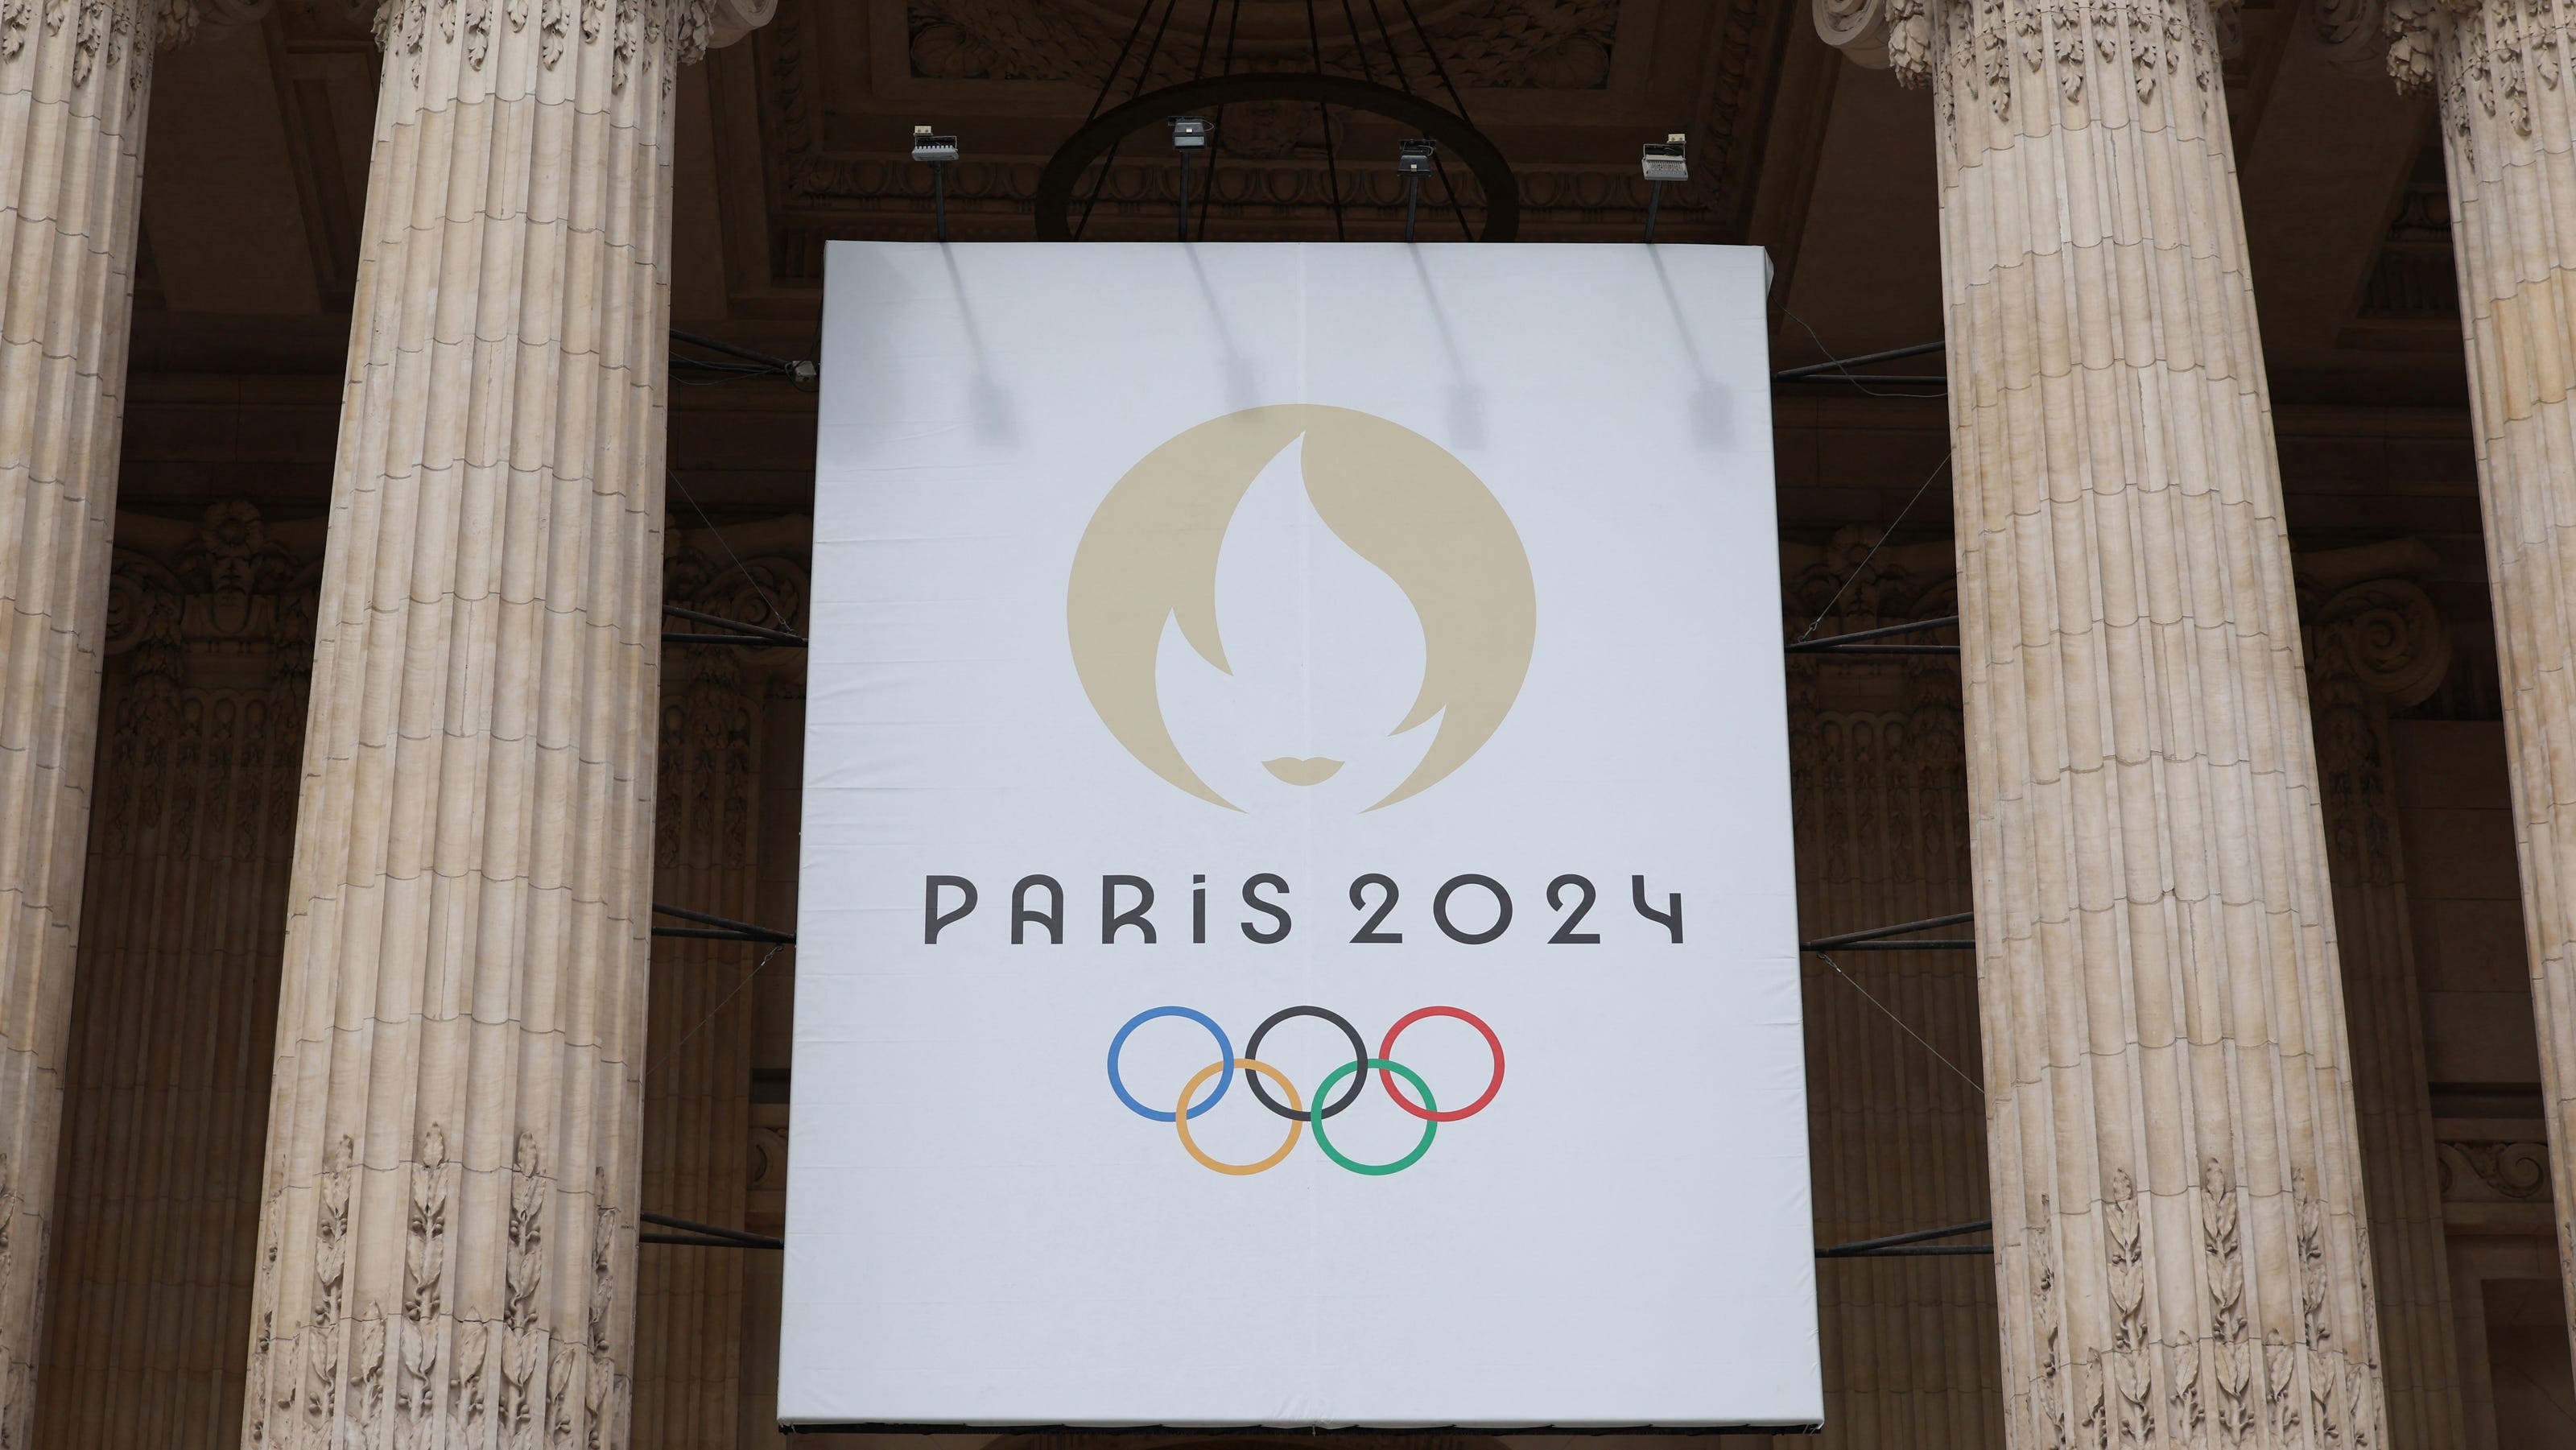 When do the 2024 Paris Olympics end?